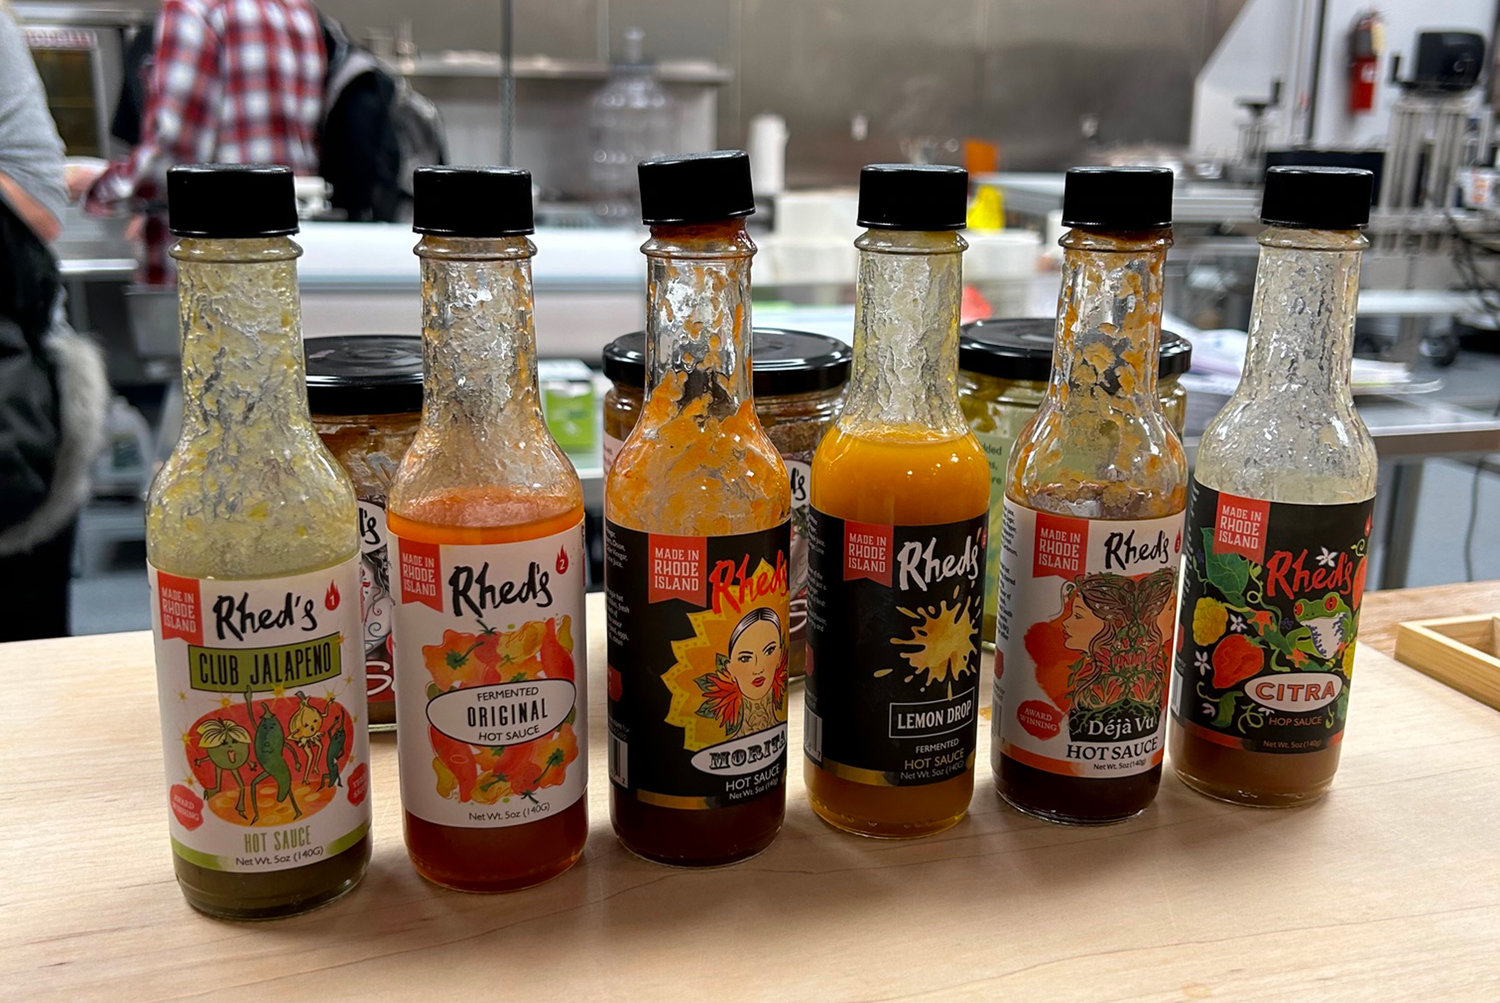 A sampling of Rhed’s hot sauce